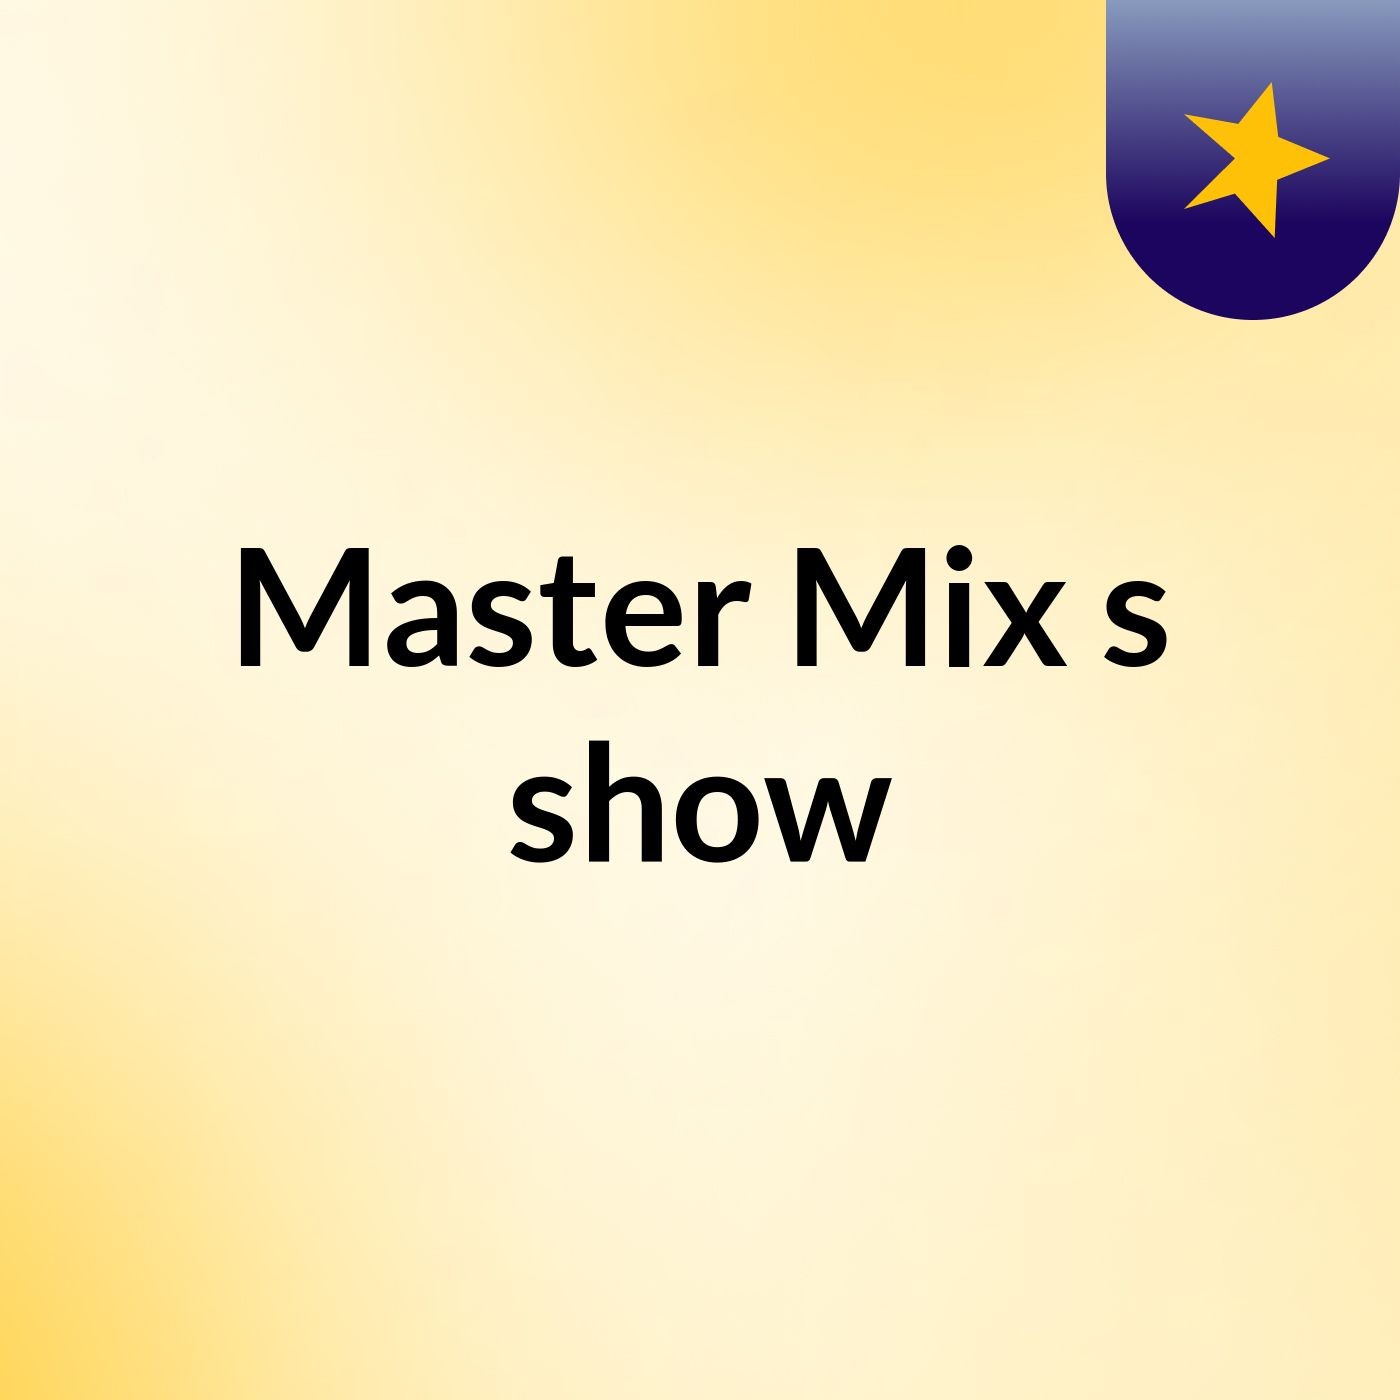 Master Mix's show